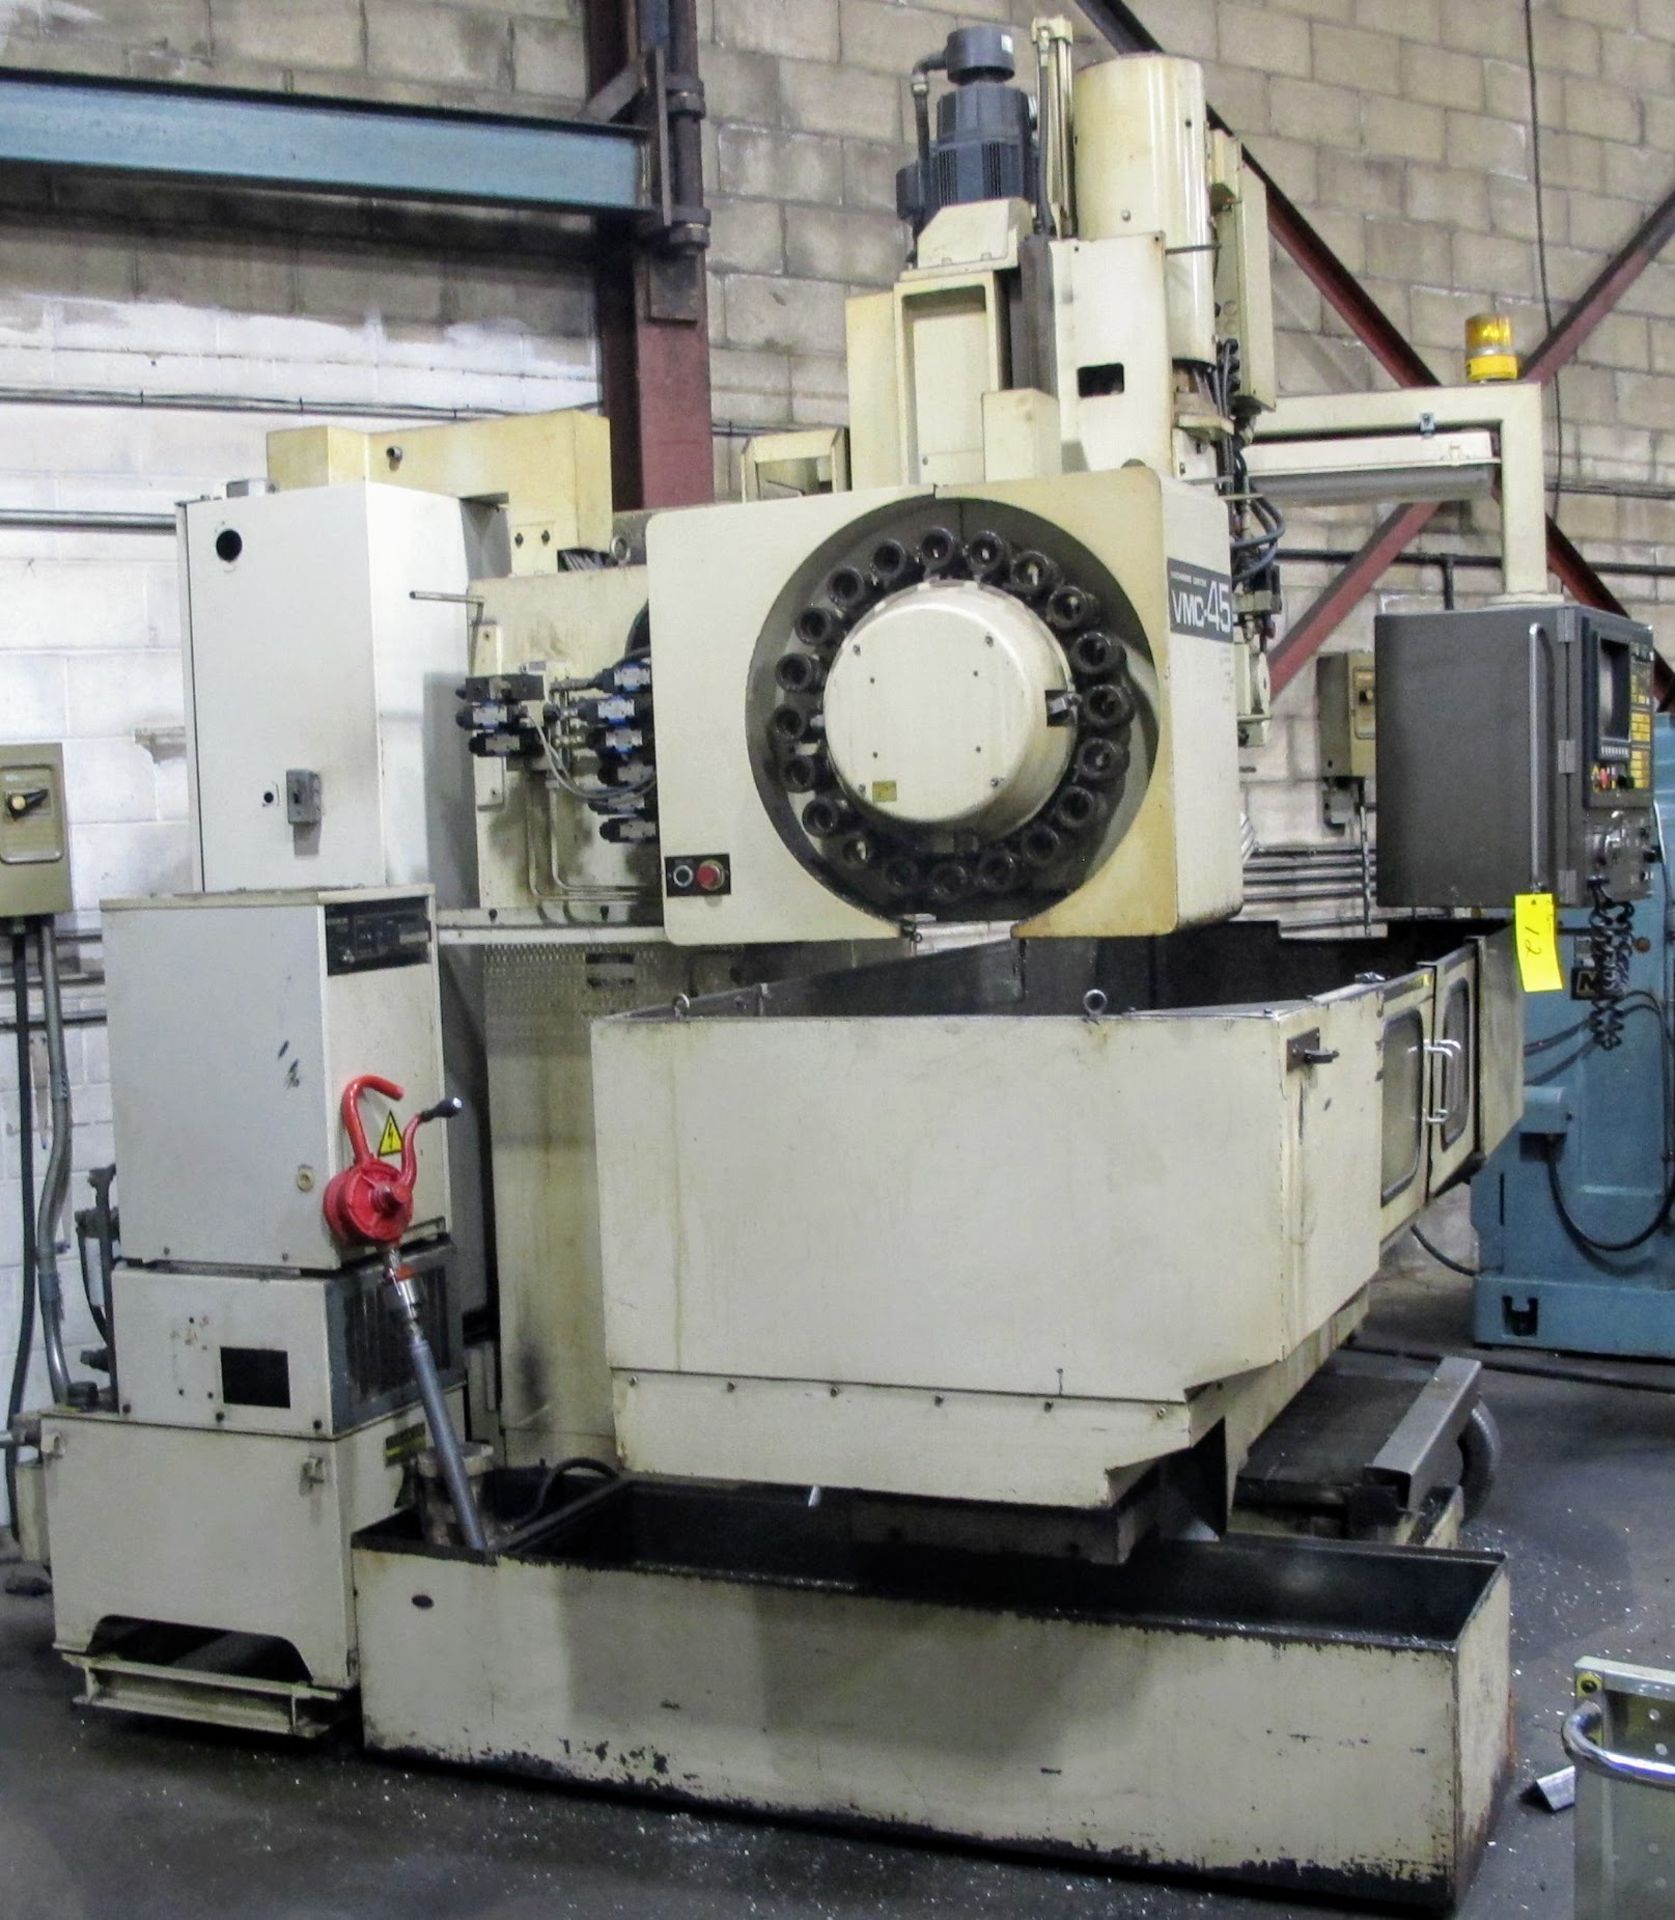 SHIBAURA VMC-45 CNC VERTICAL MACHINING CENTER, 18" X 40" TABLE, TOSNUC CNC CONTROLS, 20 ATC, COOLING - Image 4 of 5